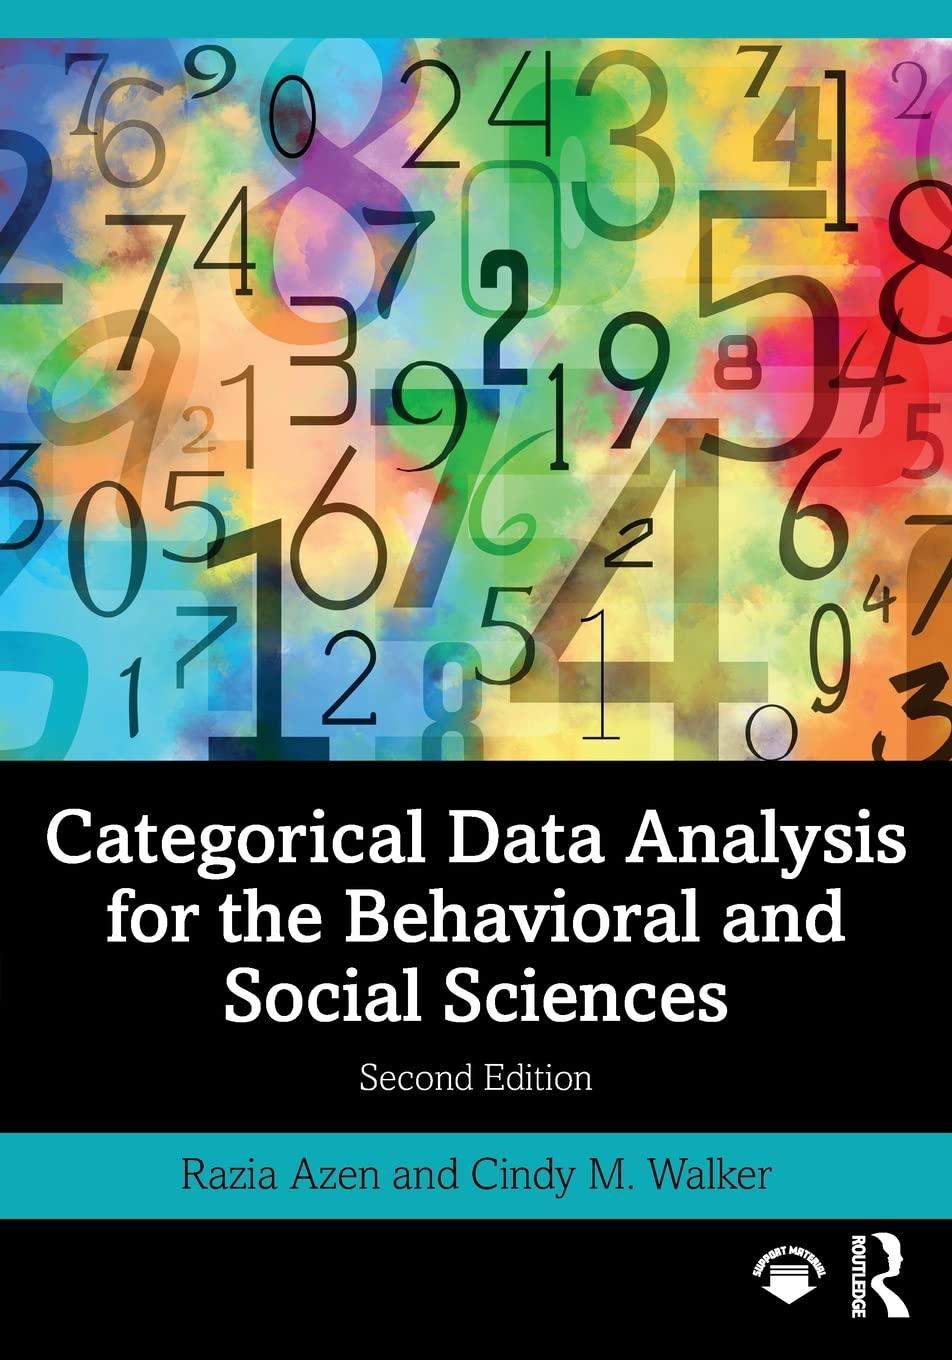 categorical data analysis for the behavioral and social sciences 2nd edition razia azen, cindy m. walker